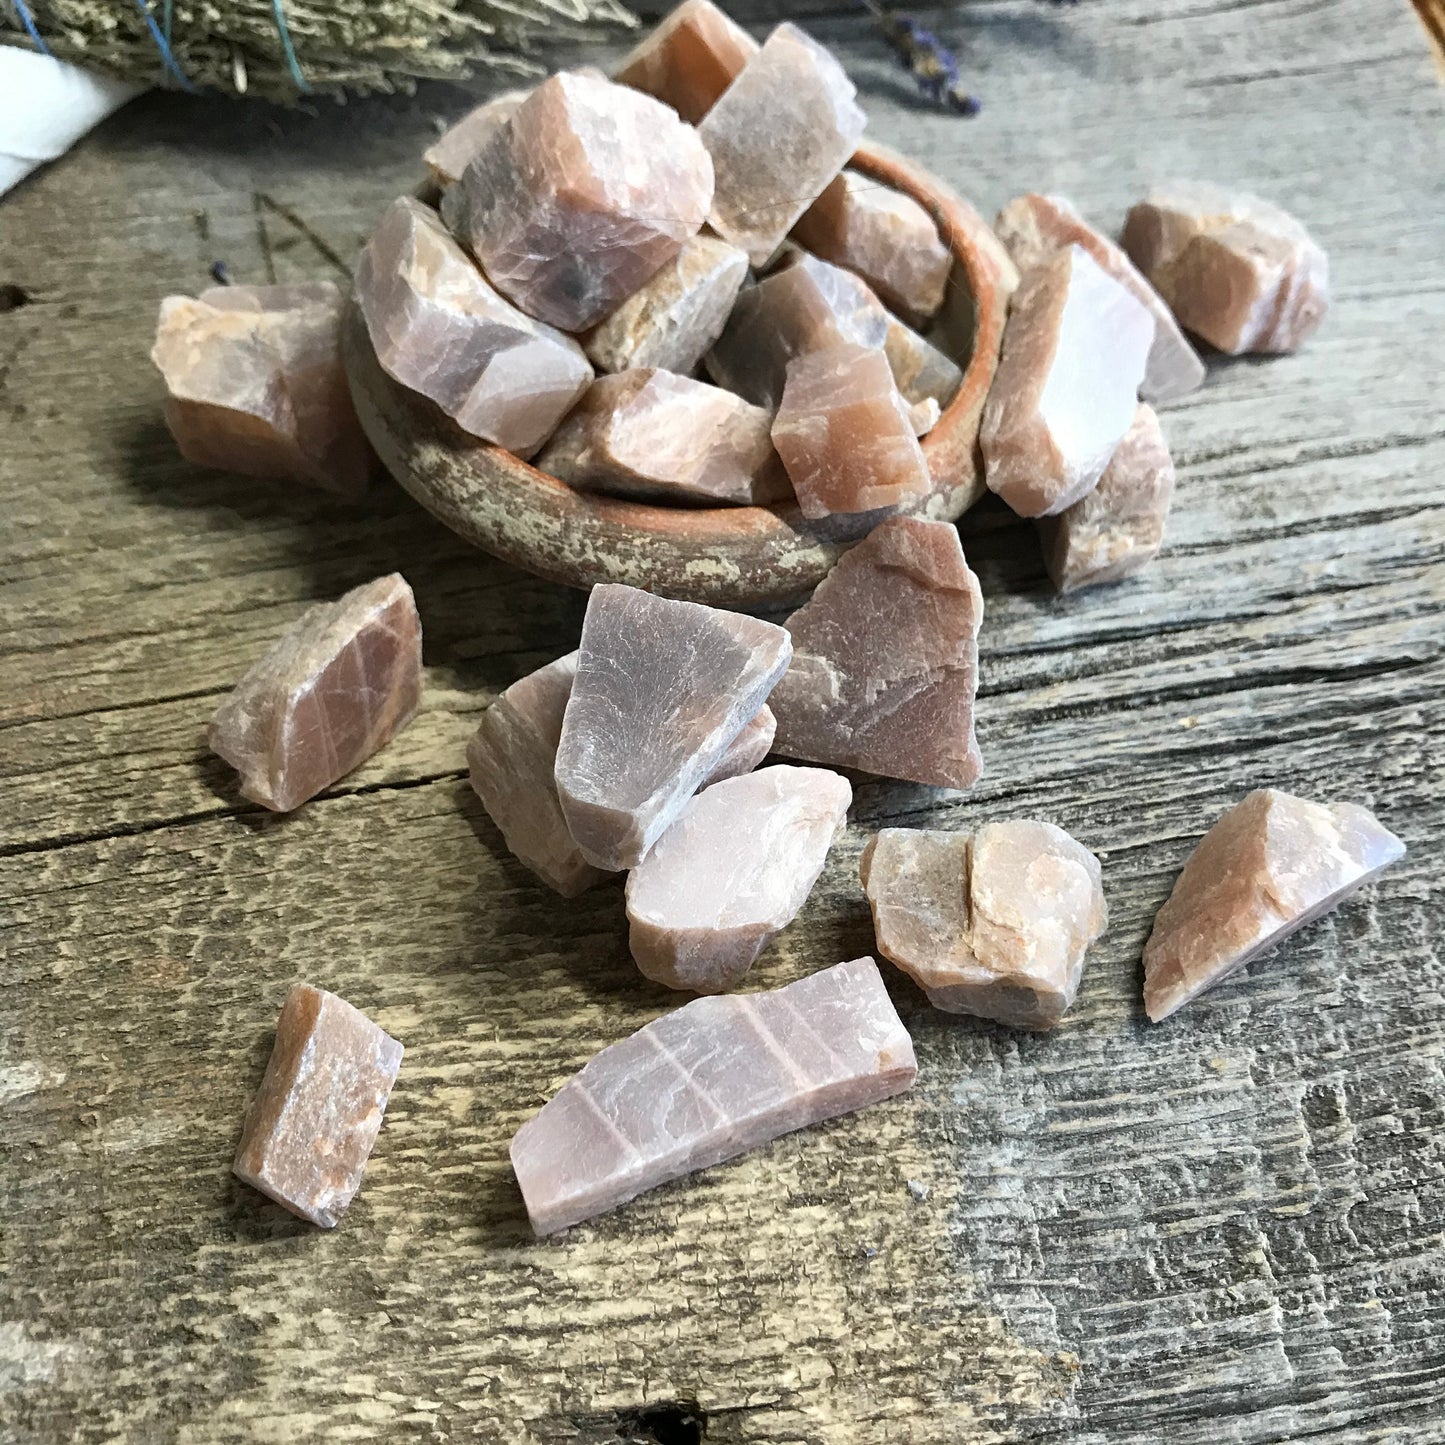 Raw Peach Moonstone, One Crystal (Approx. 1"), Peach Stones, Supply for Crystal Grid or Crafts 0123